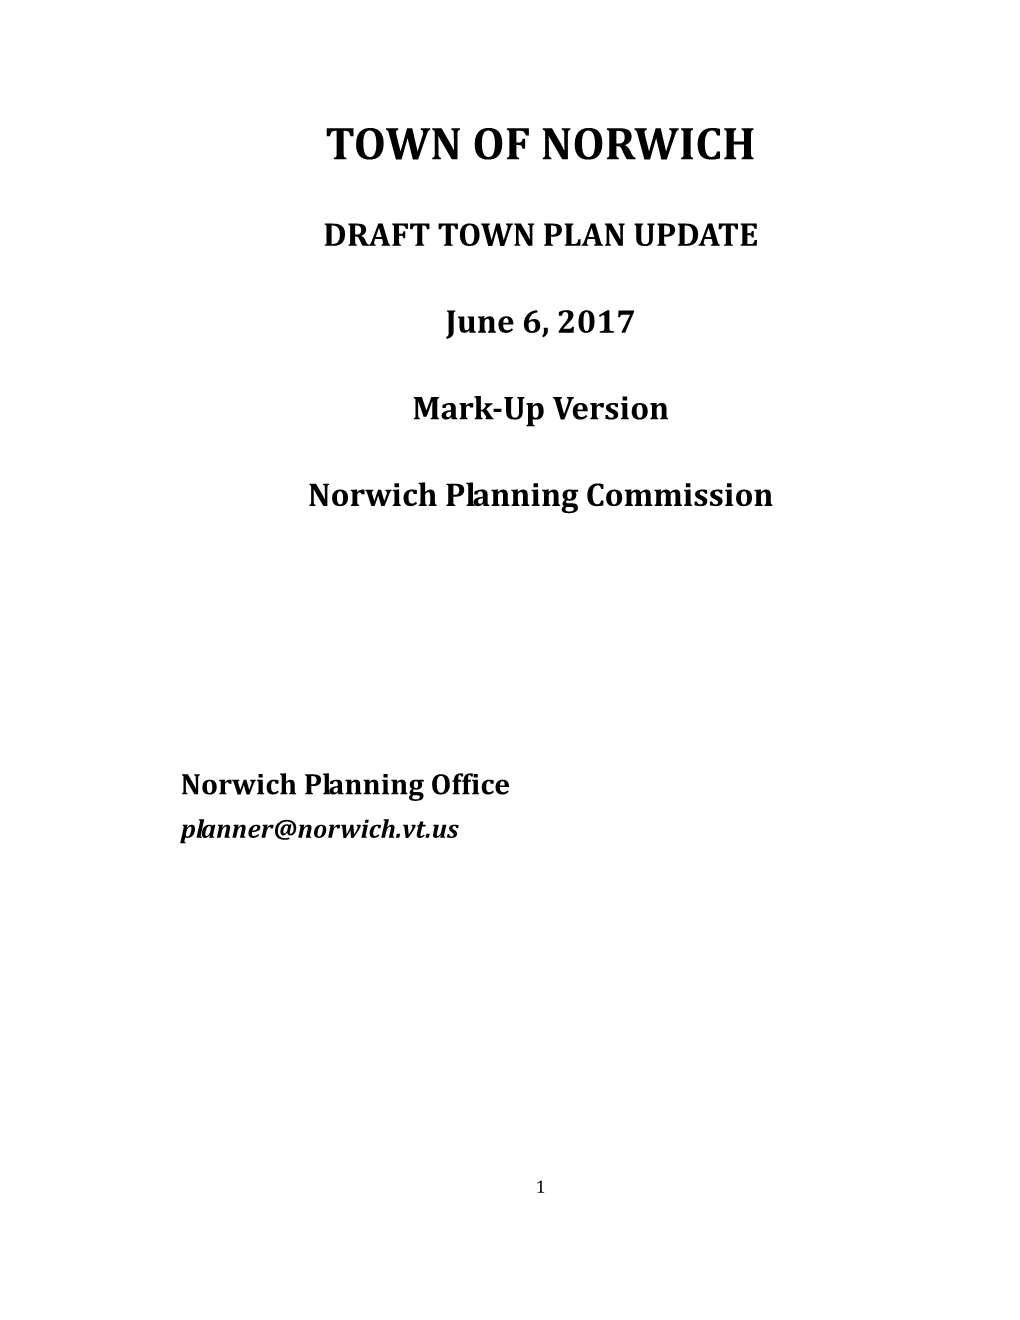 Town of Norwich, Vermont, December 2000) As Guidelines for Future Transportation Facility Planning in the Village